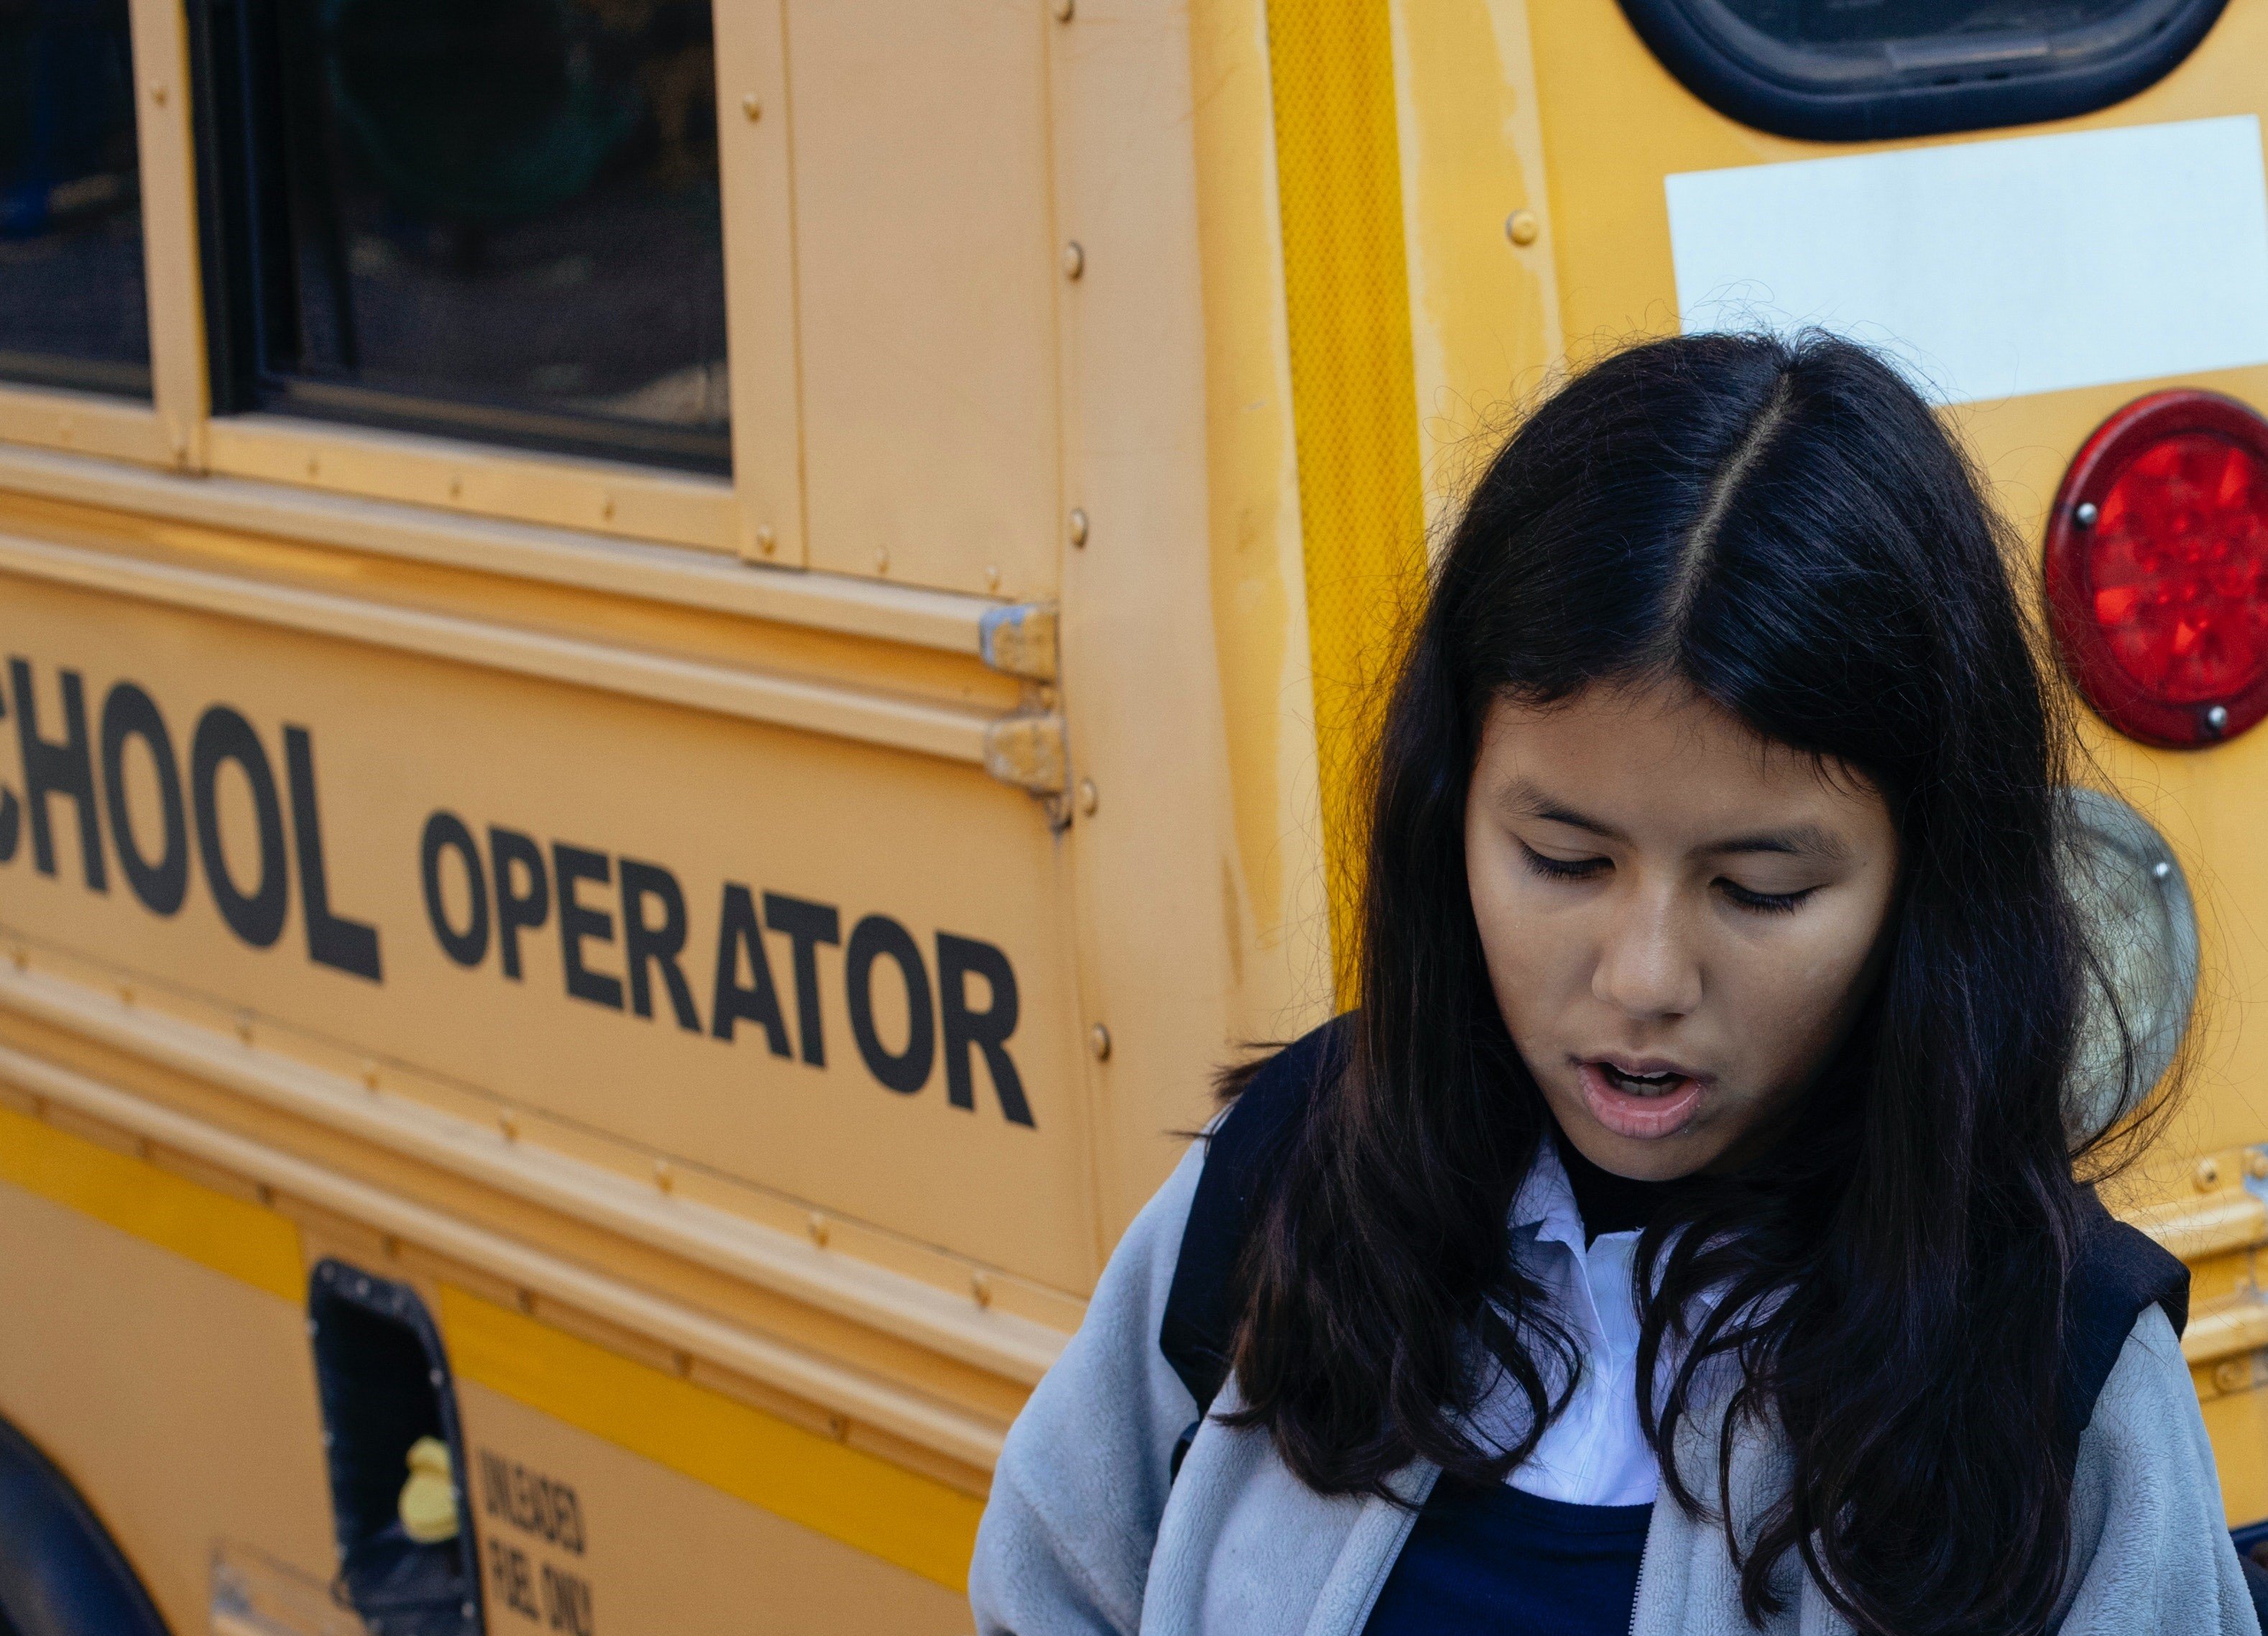 The school bus driver supposedly told off the girl while dropping her off | Photo: Pexels